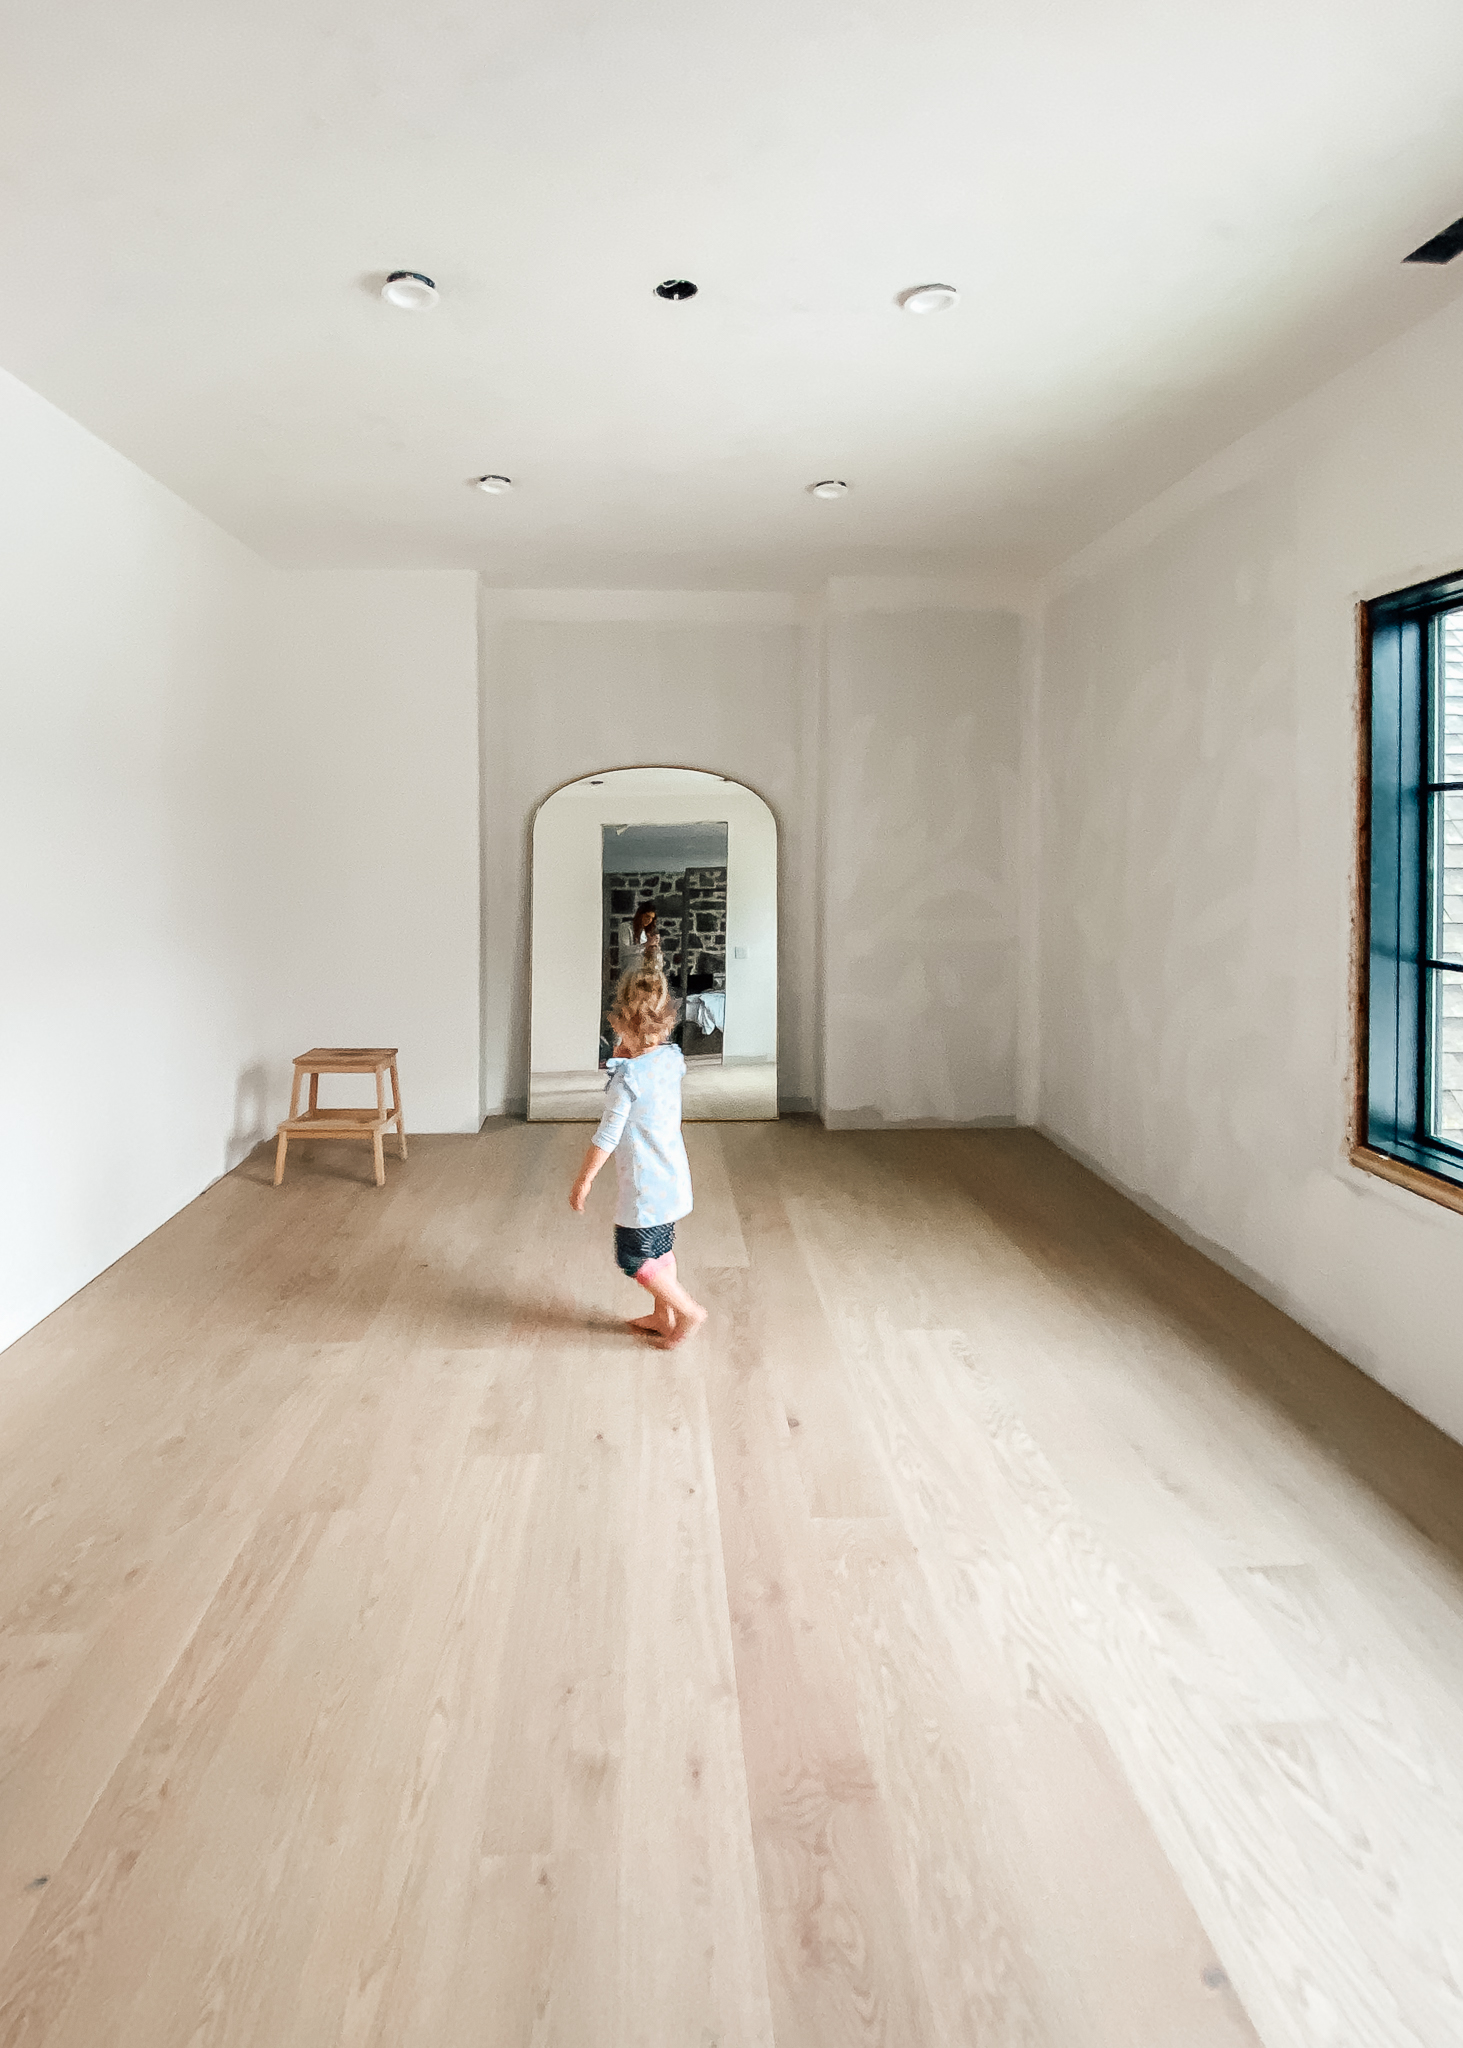 All about The New Wood Flooring throughout Our House! - Chris Loves Julia